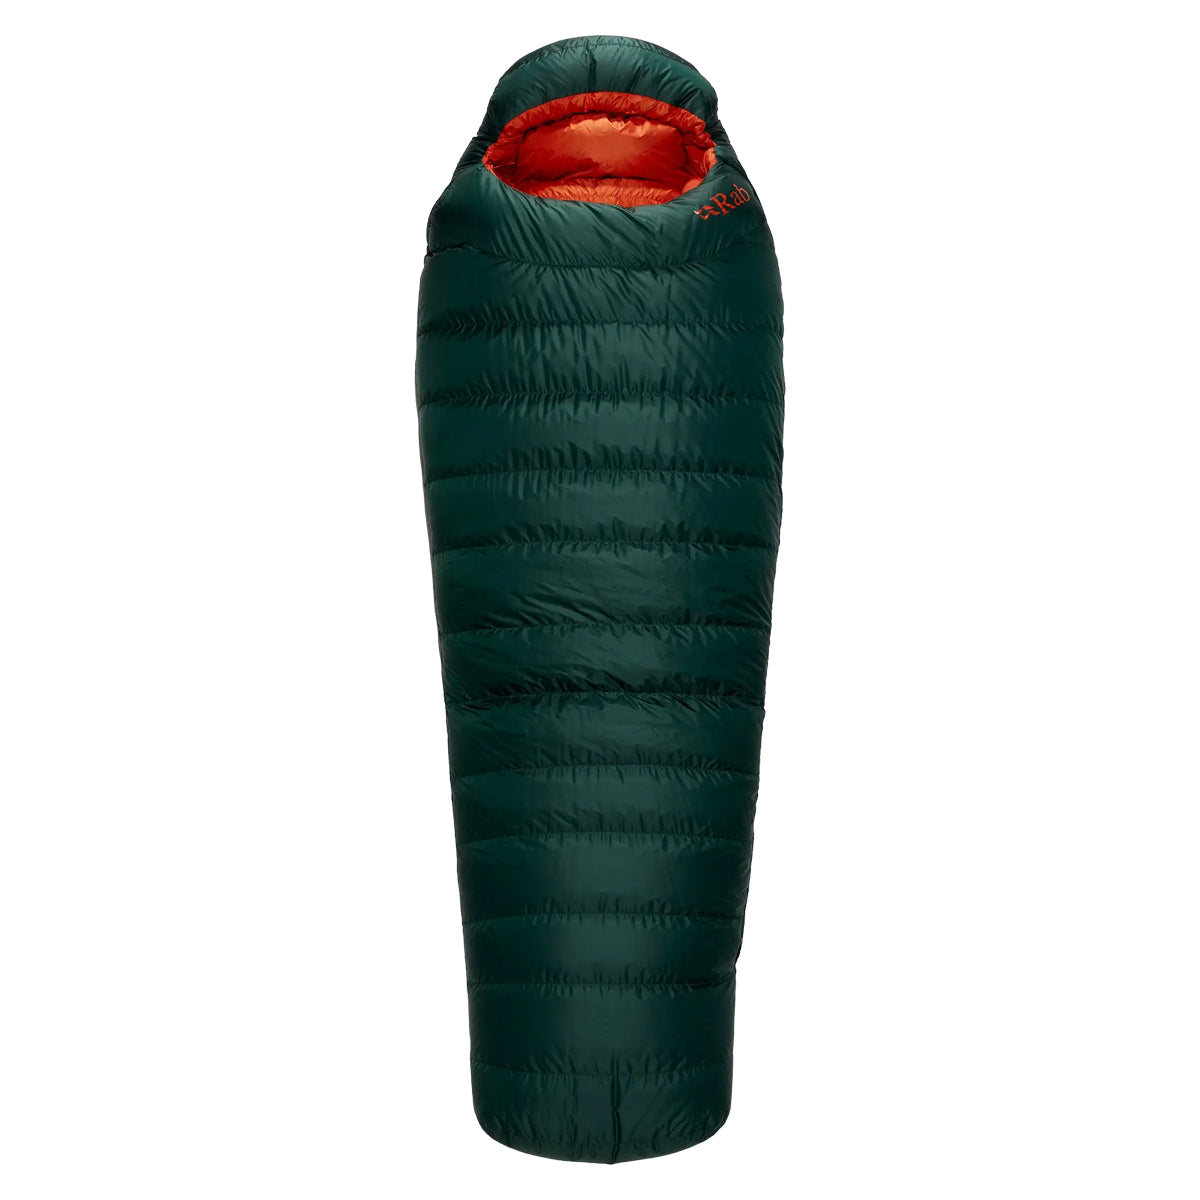 Rab Ascent 1100 Down Sleeping Bag in  by GOHUNT | Rab - GOHUNT Shop